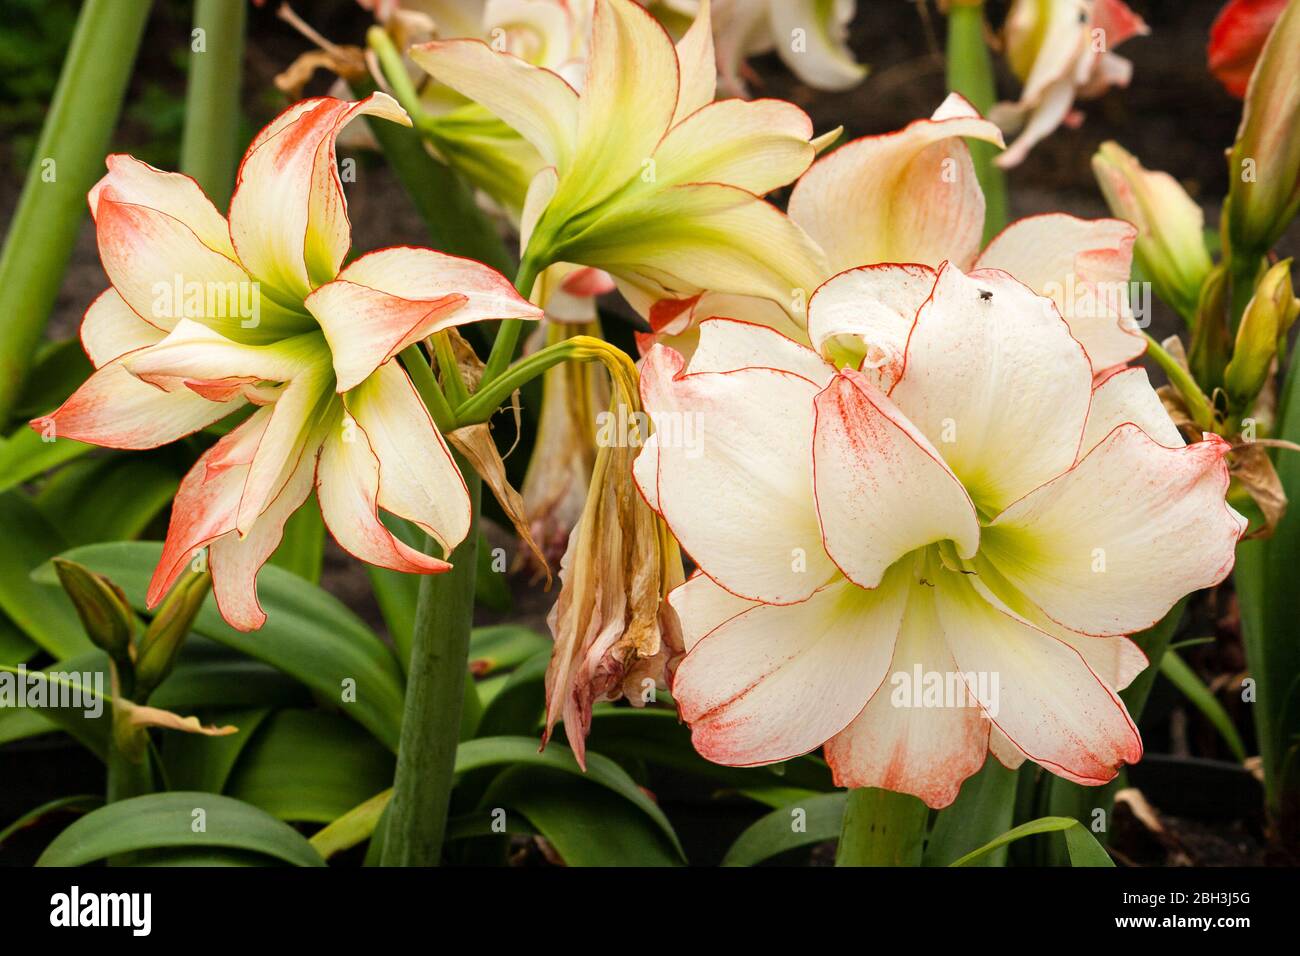 Picotee red edges and red shading on white petals of the florist's Amaryllis, Hippeastrum 'Harlequin' Stock Photo